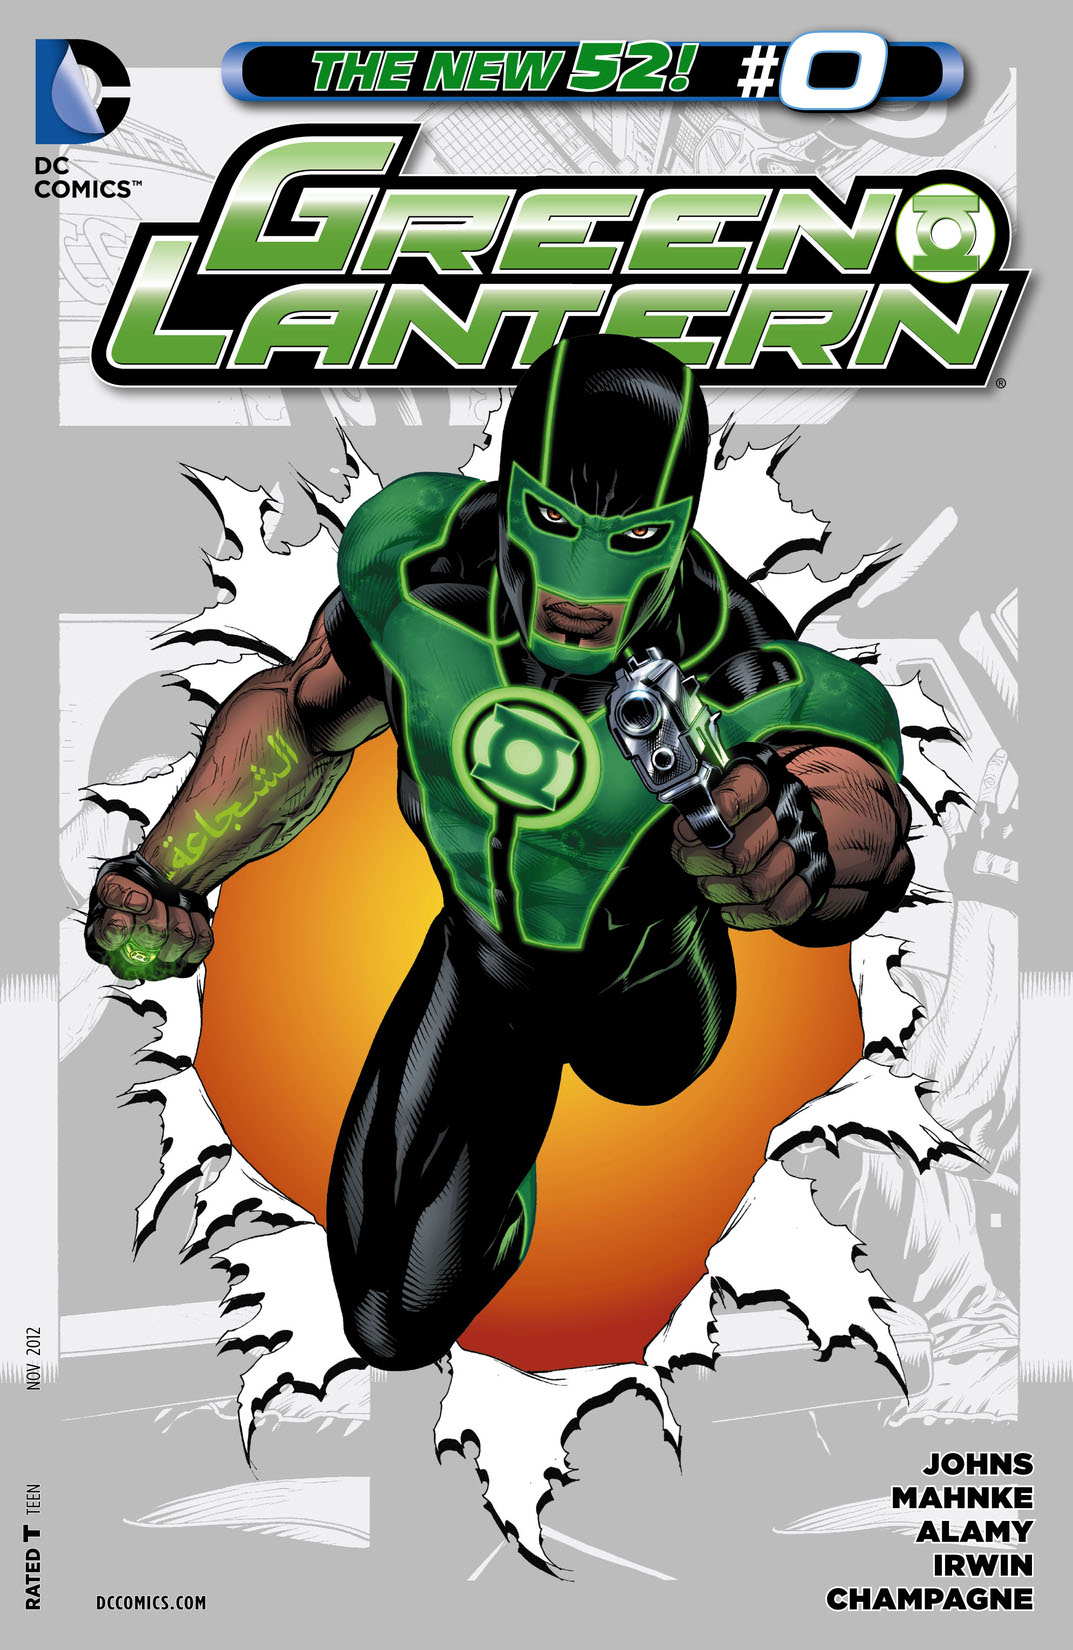 Green Lantern (2011-) #0 preview images